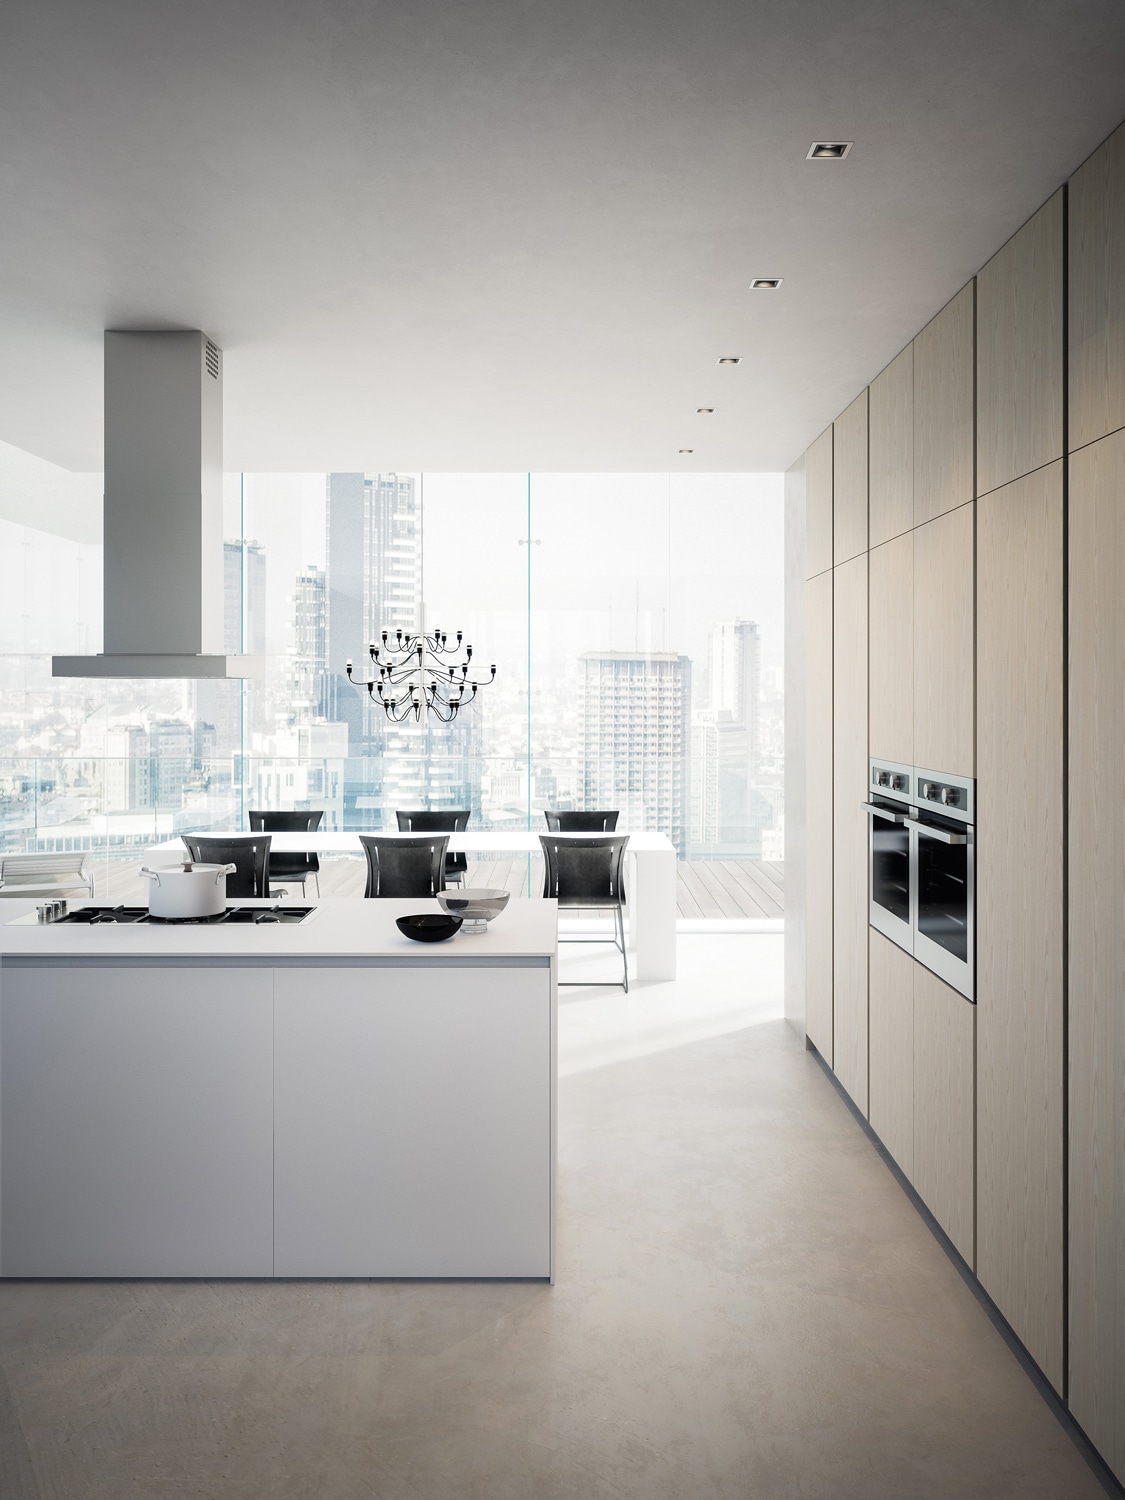 Luxury kitchen designs available at MandiCasa Hollywood FL